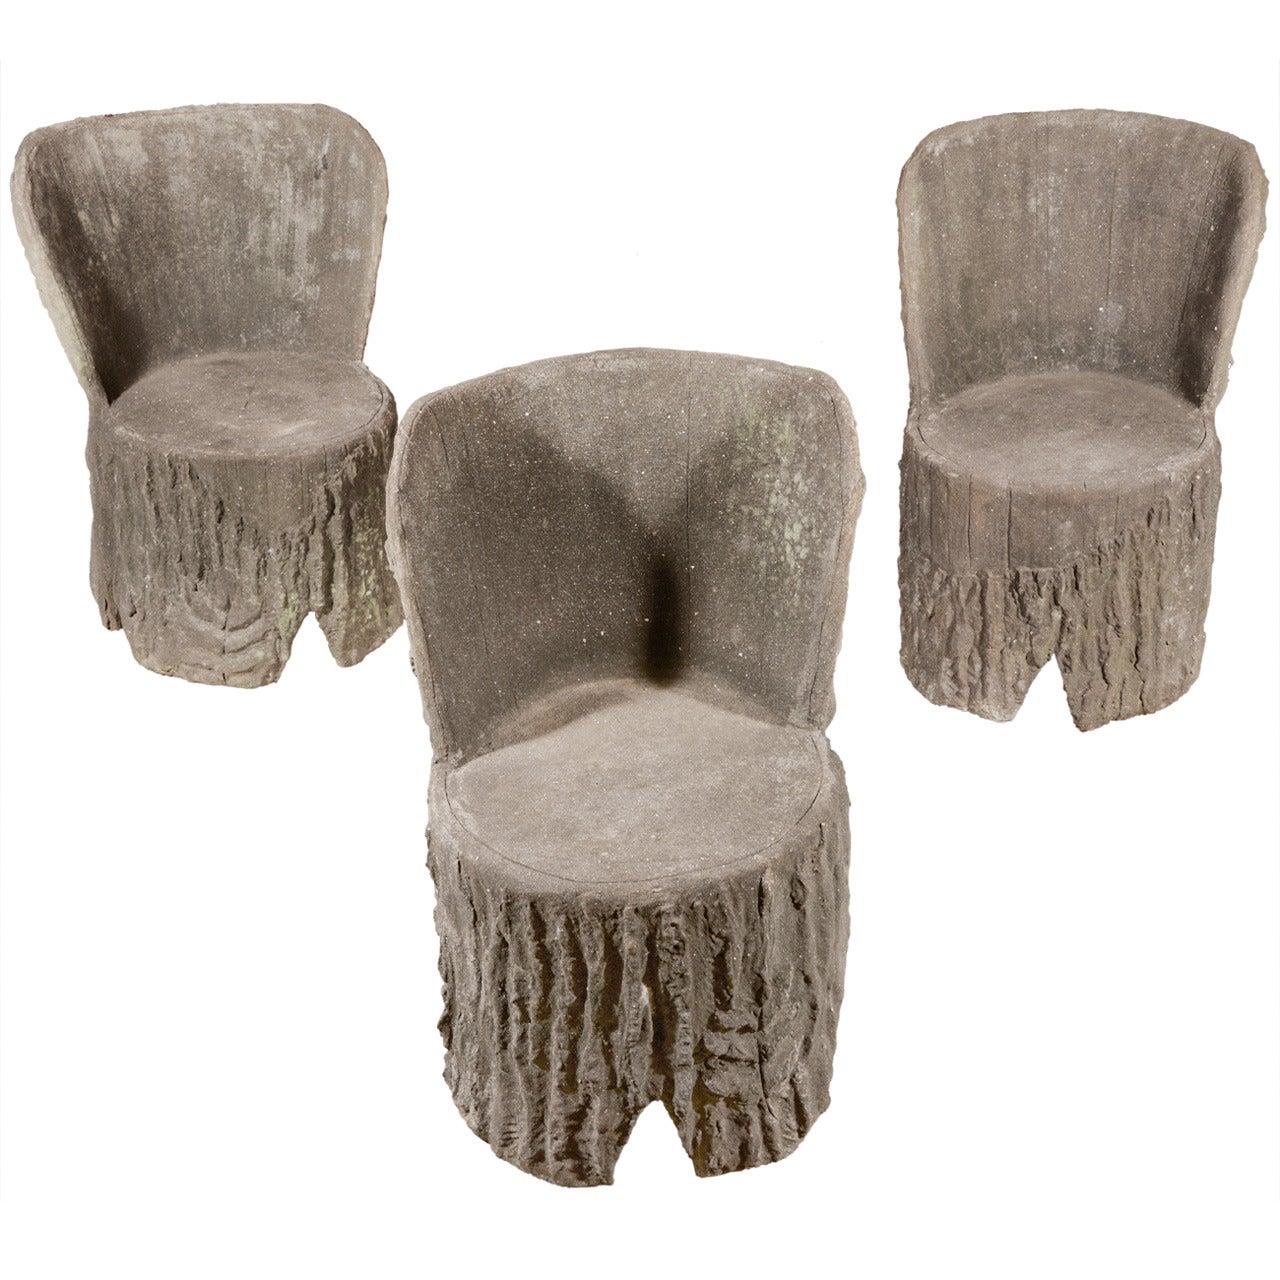 Set of Three Faux Bois Chairs